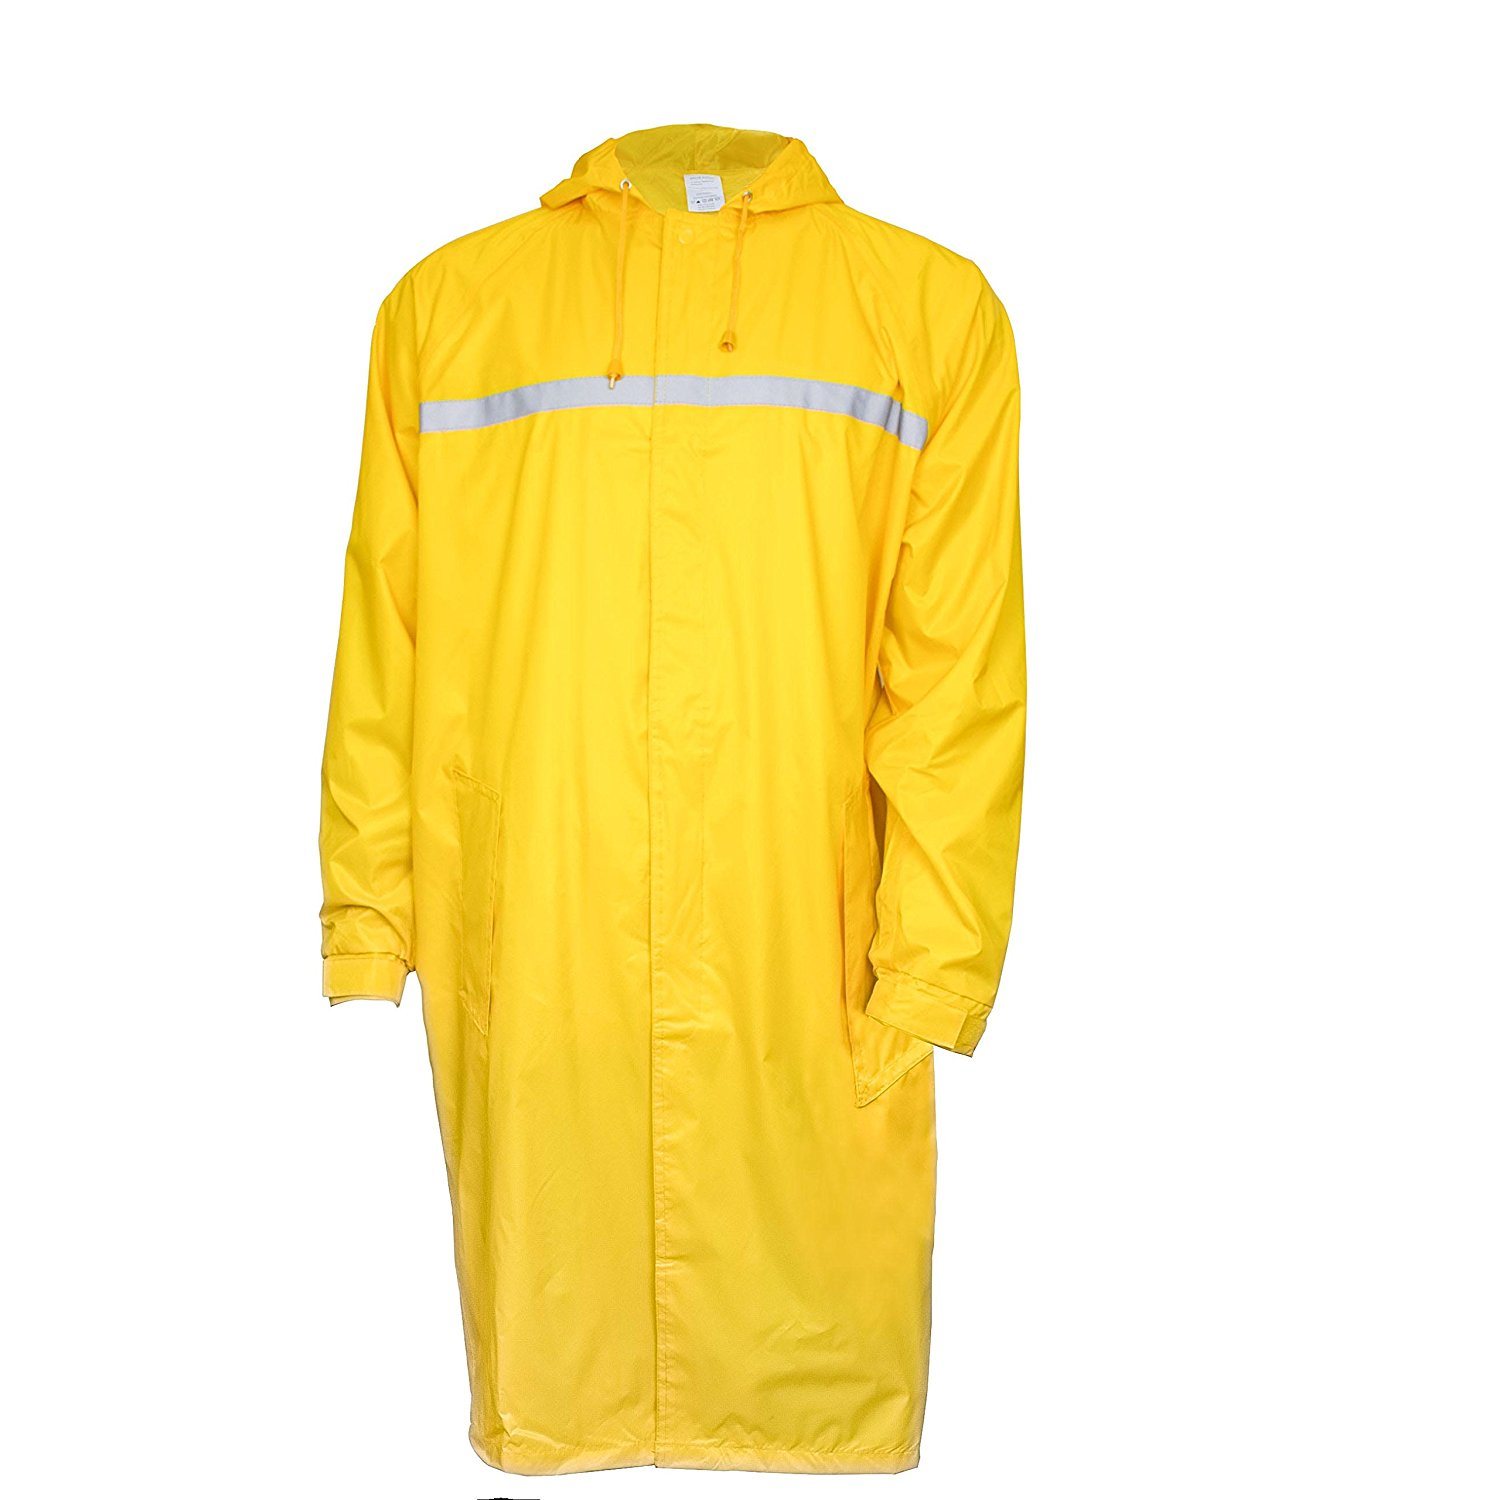 Yellow Long Raincoat with Reflective Tape for Police Outdoor Duty